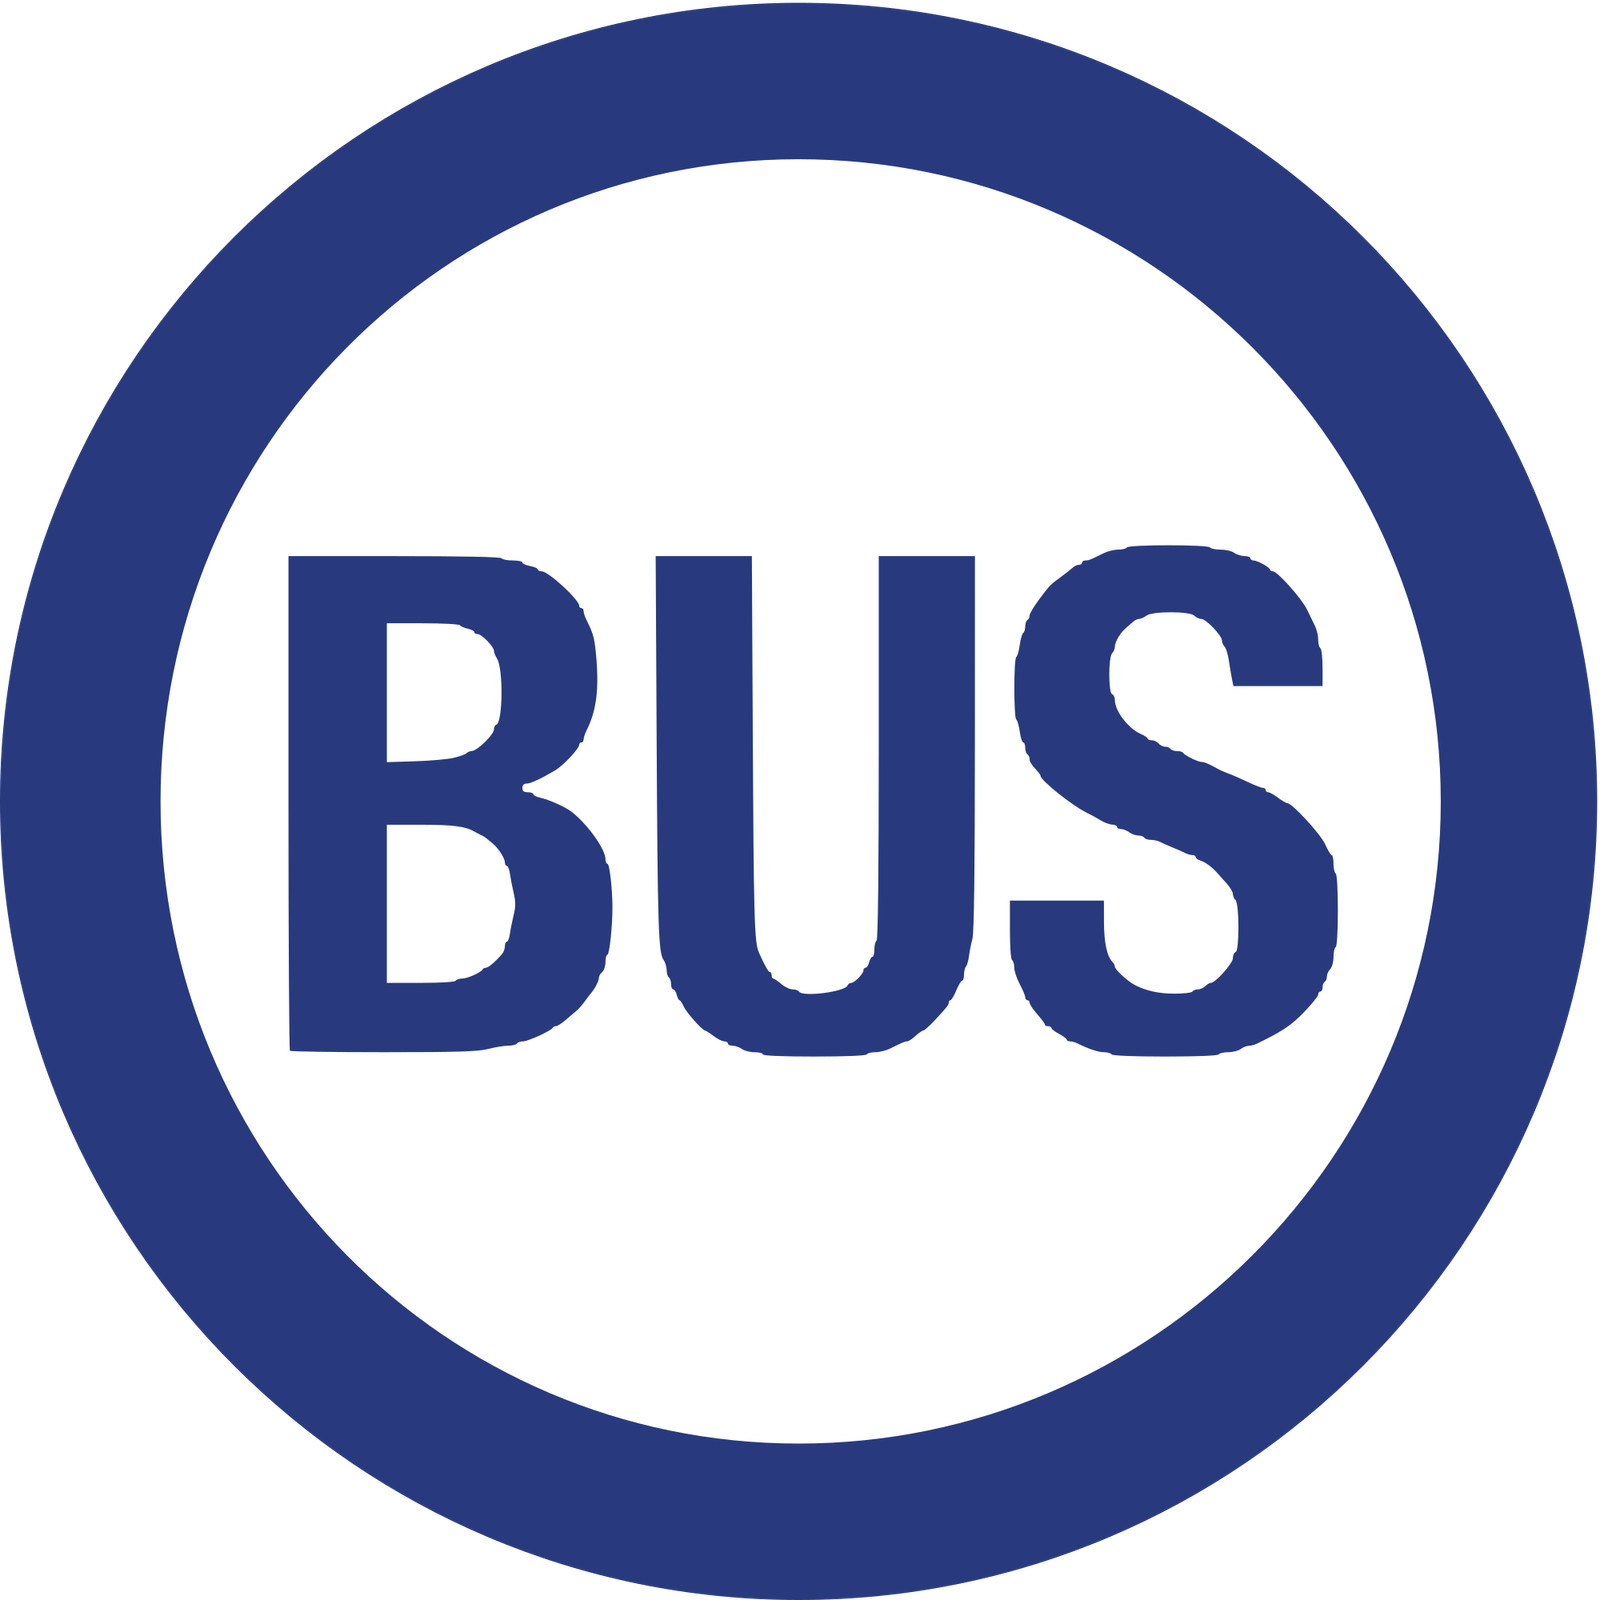 Buses Lines